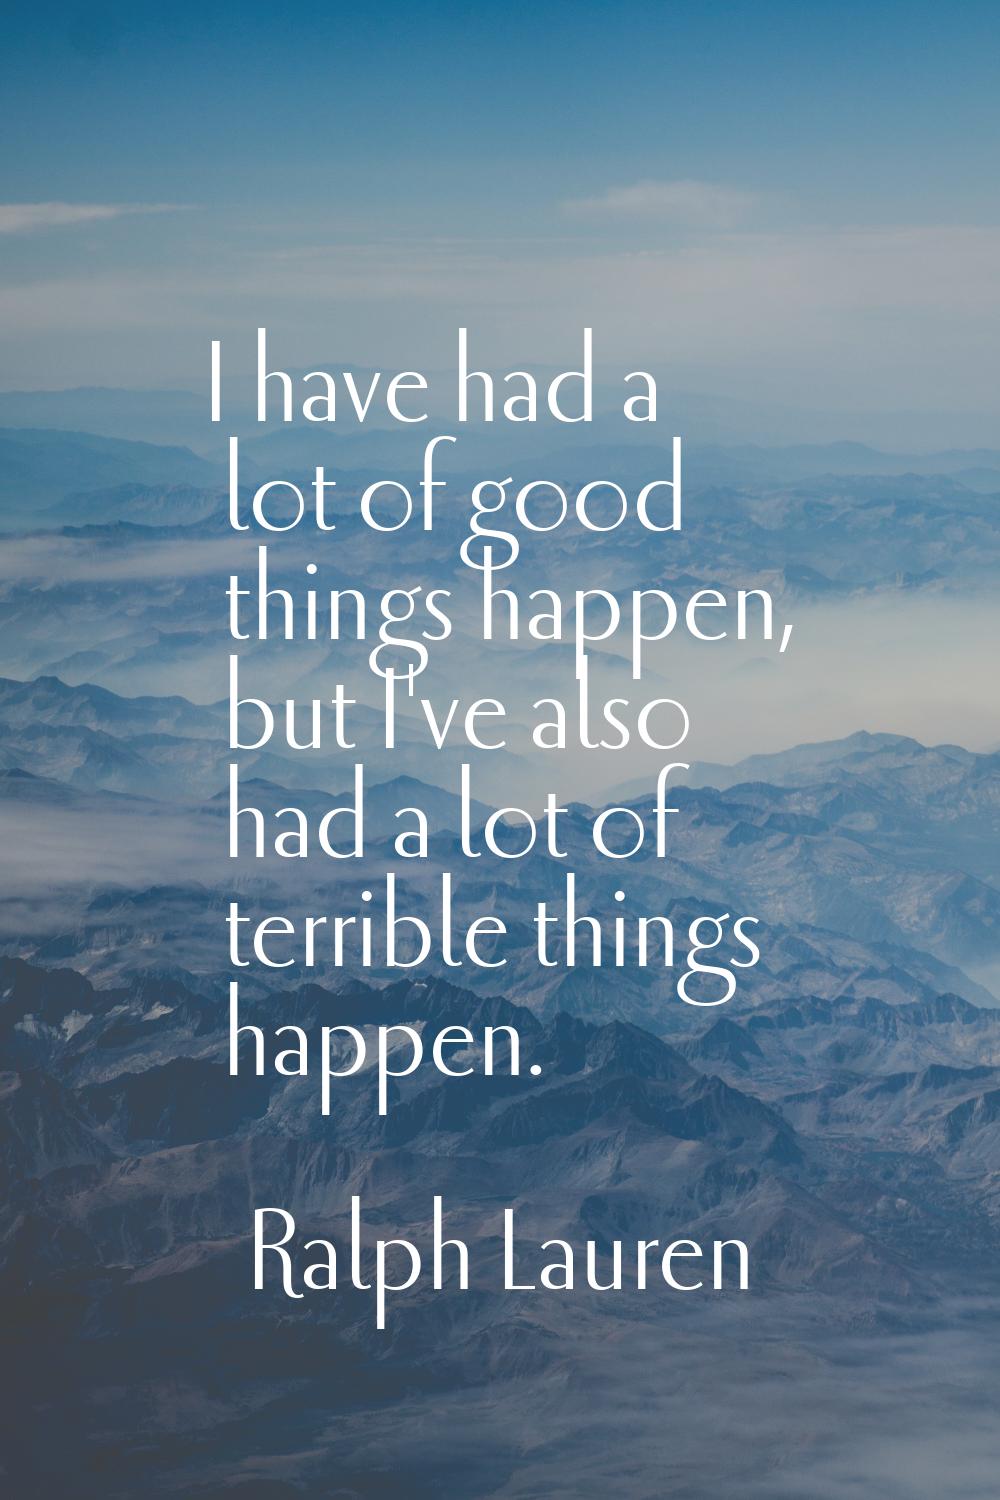 I have had a lot of good things happen, but I've also had a lot of terrible things happen.